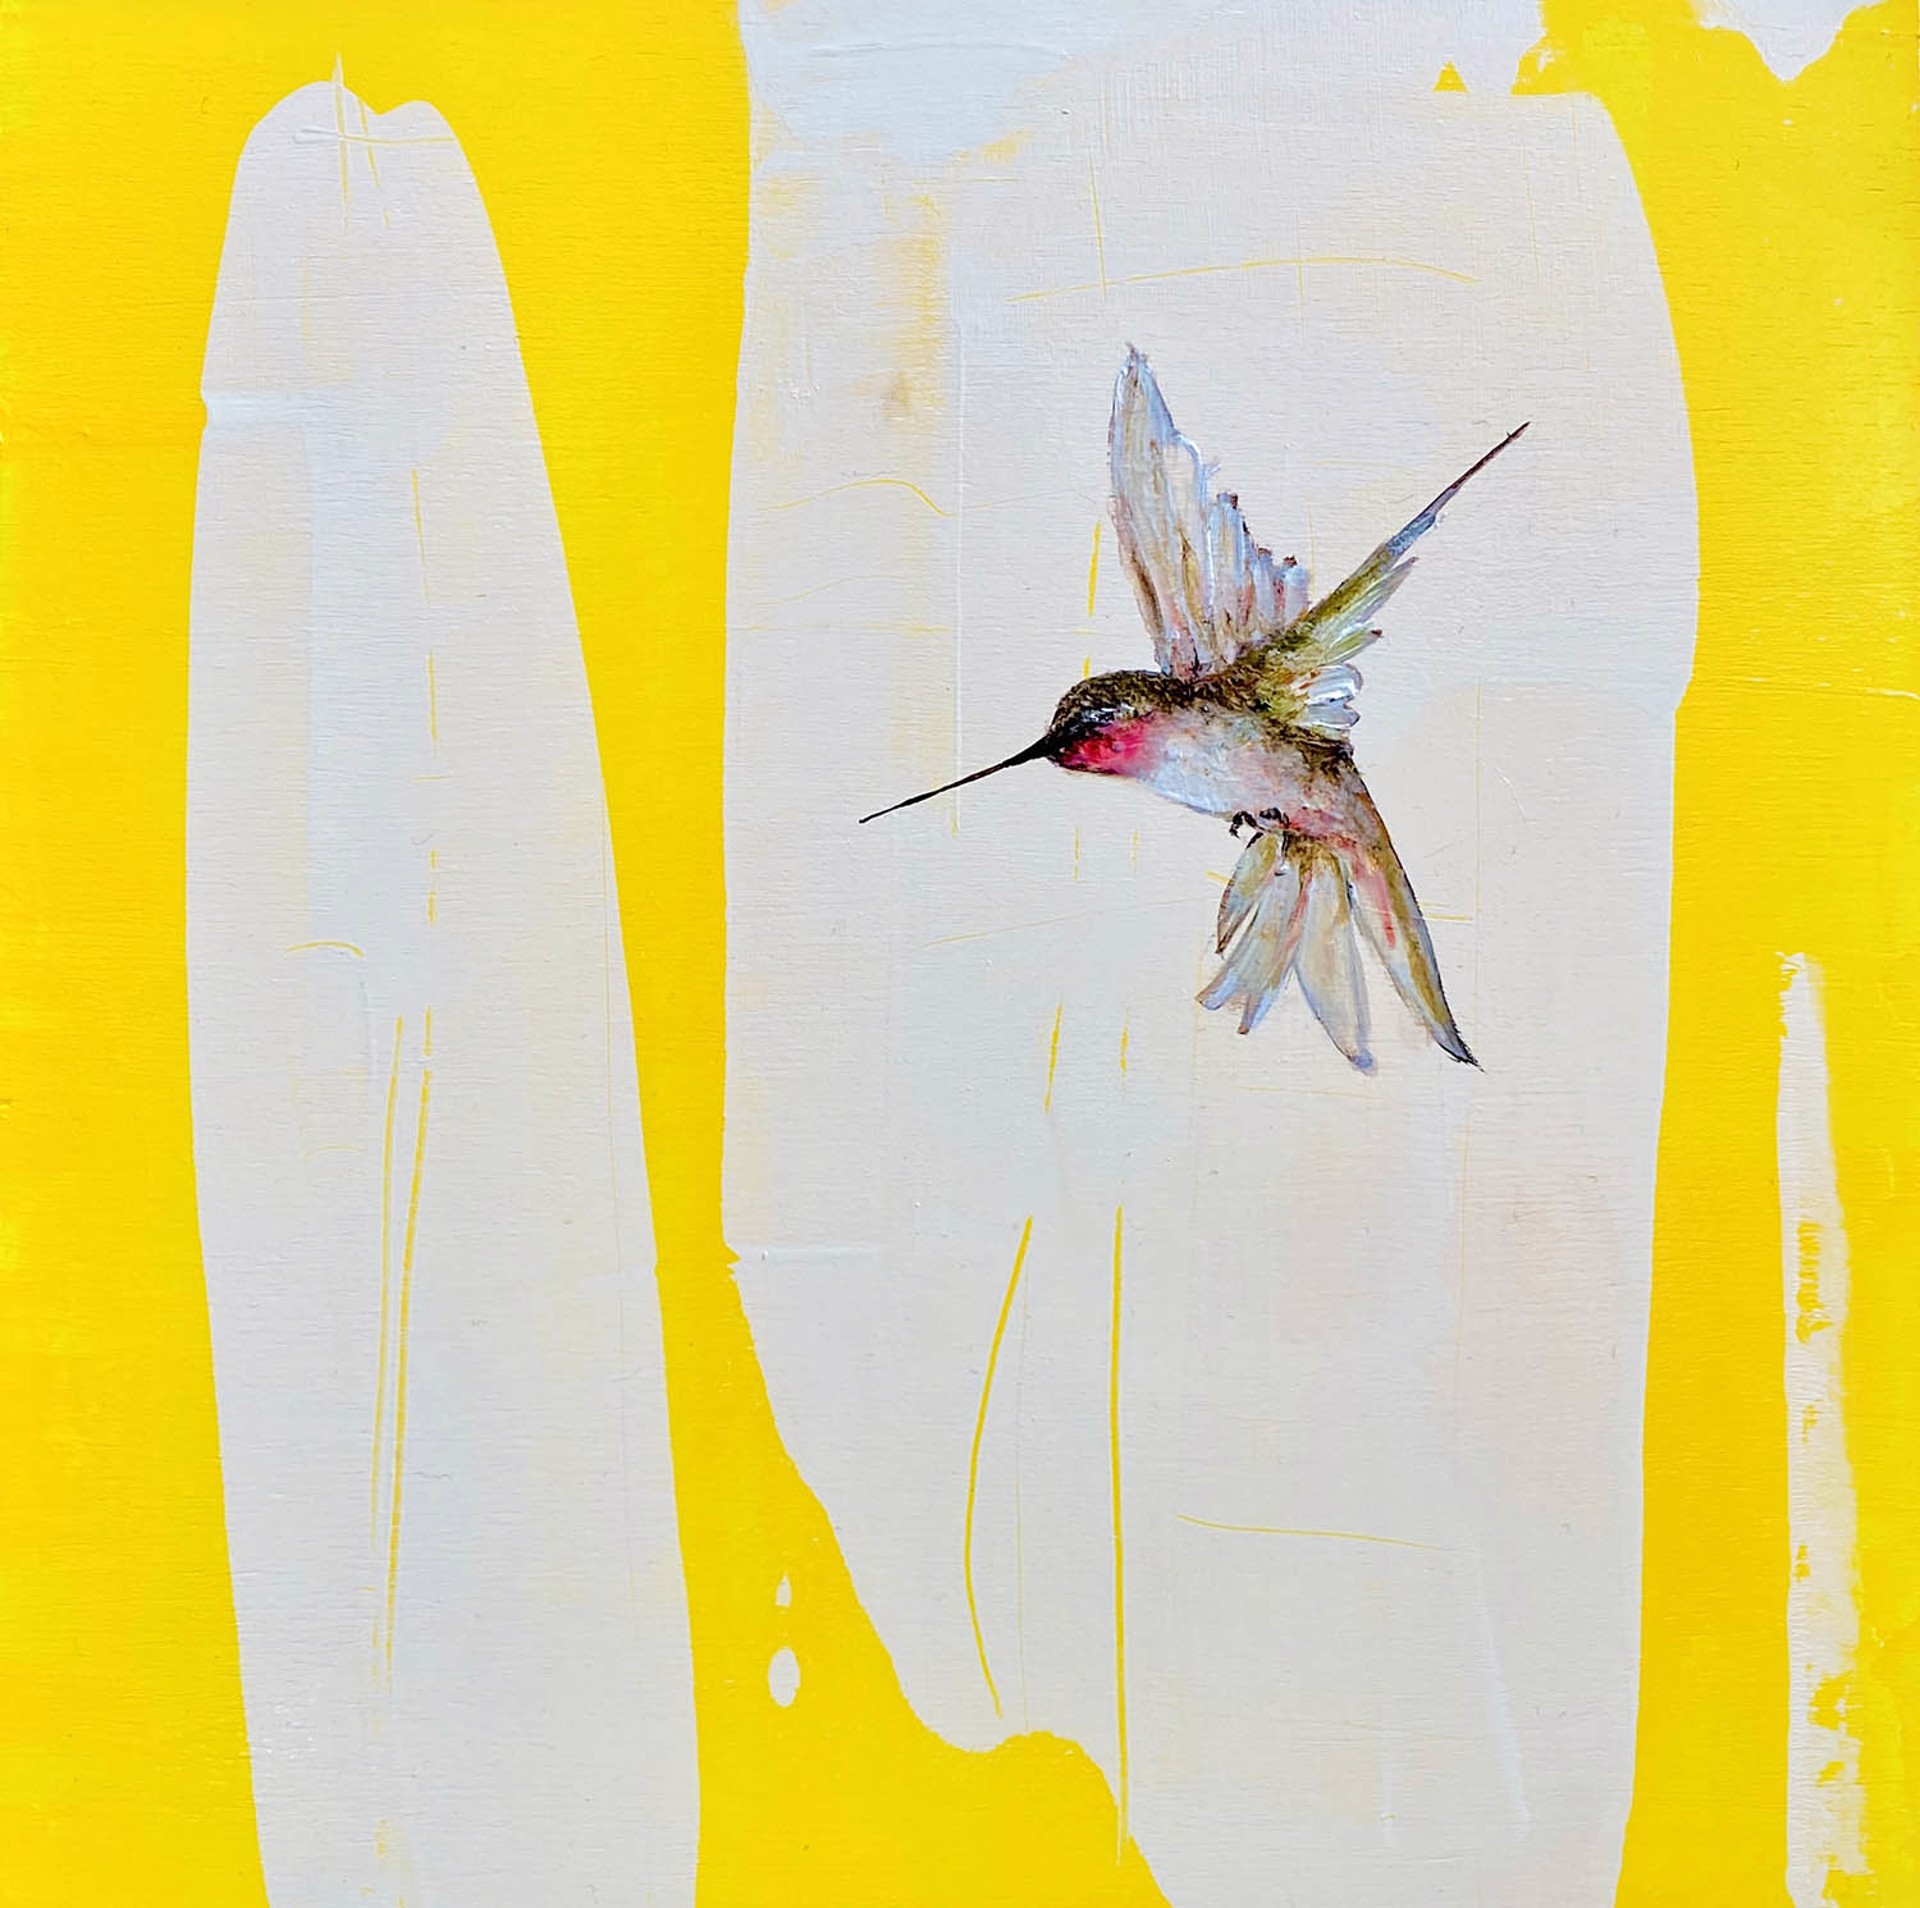 Original Mixed Media Painting By Jenna Von Benedikt Featuring a single Green Hummingbird On Abstract White And Bright Yellow Background